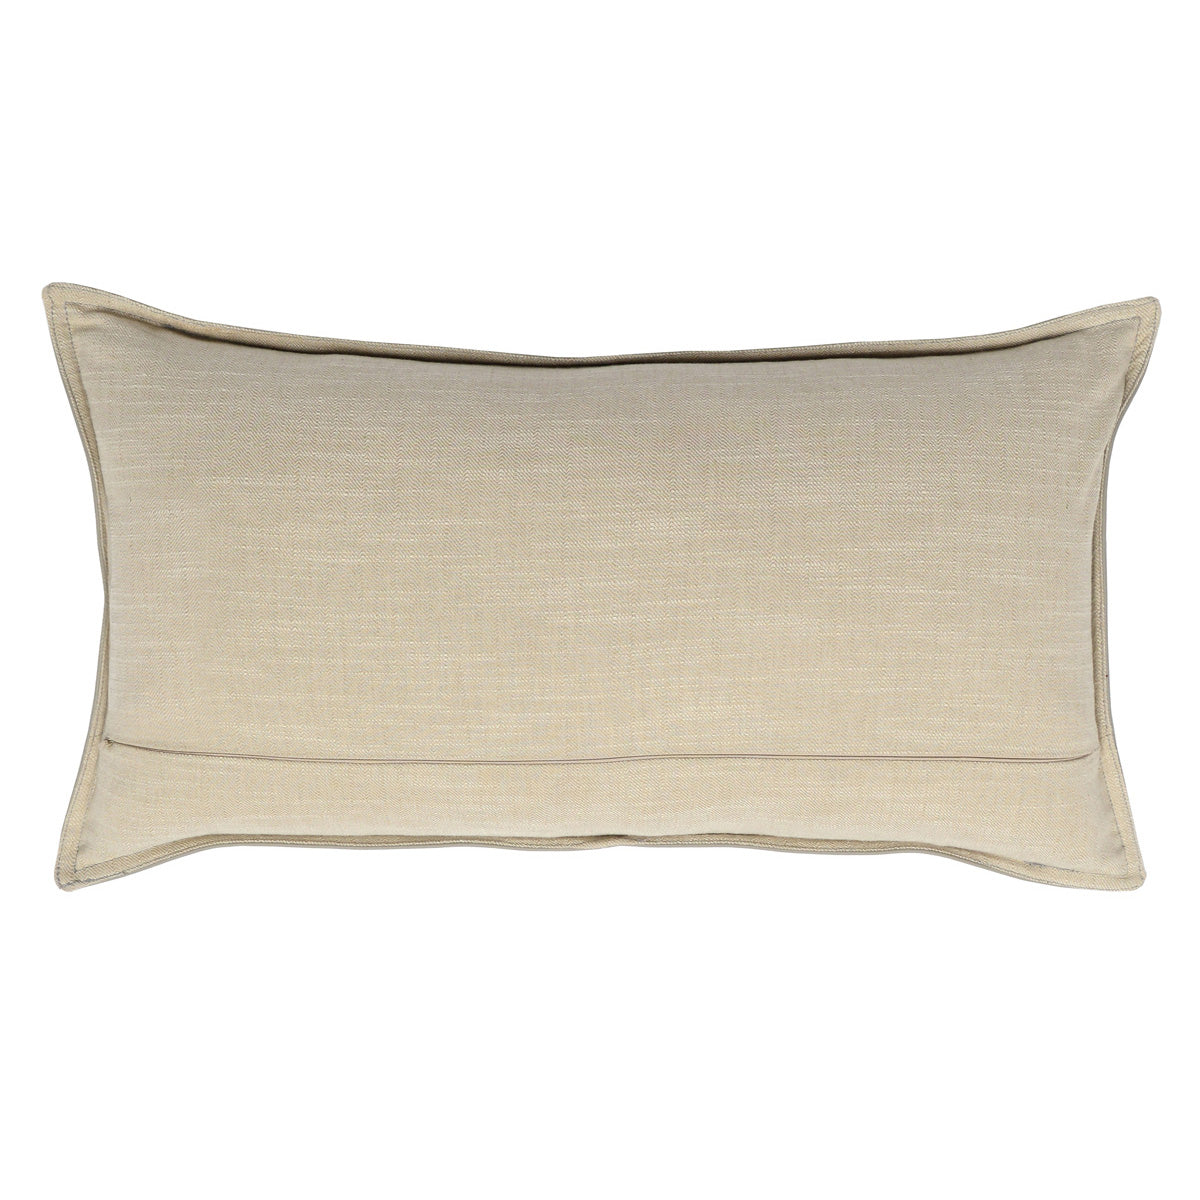 SLD Leather Pike Gray 14x26 Accent Pillow